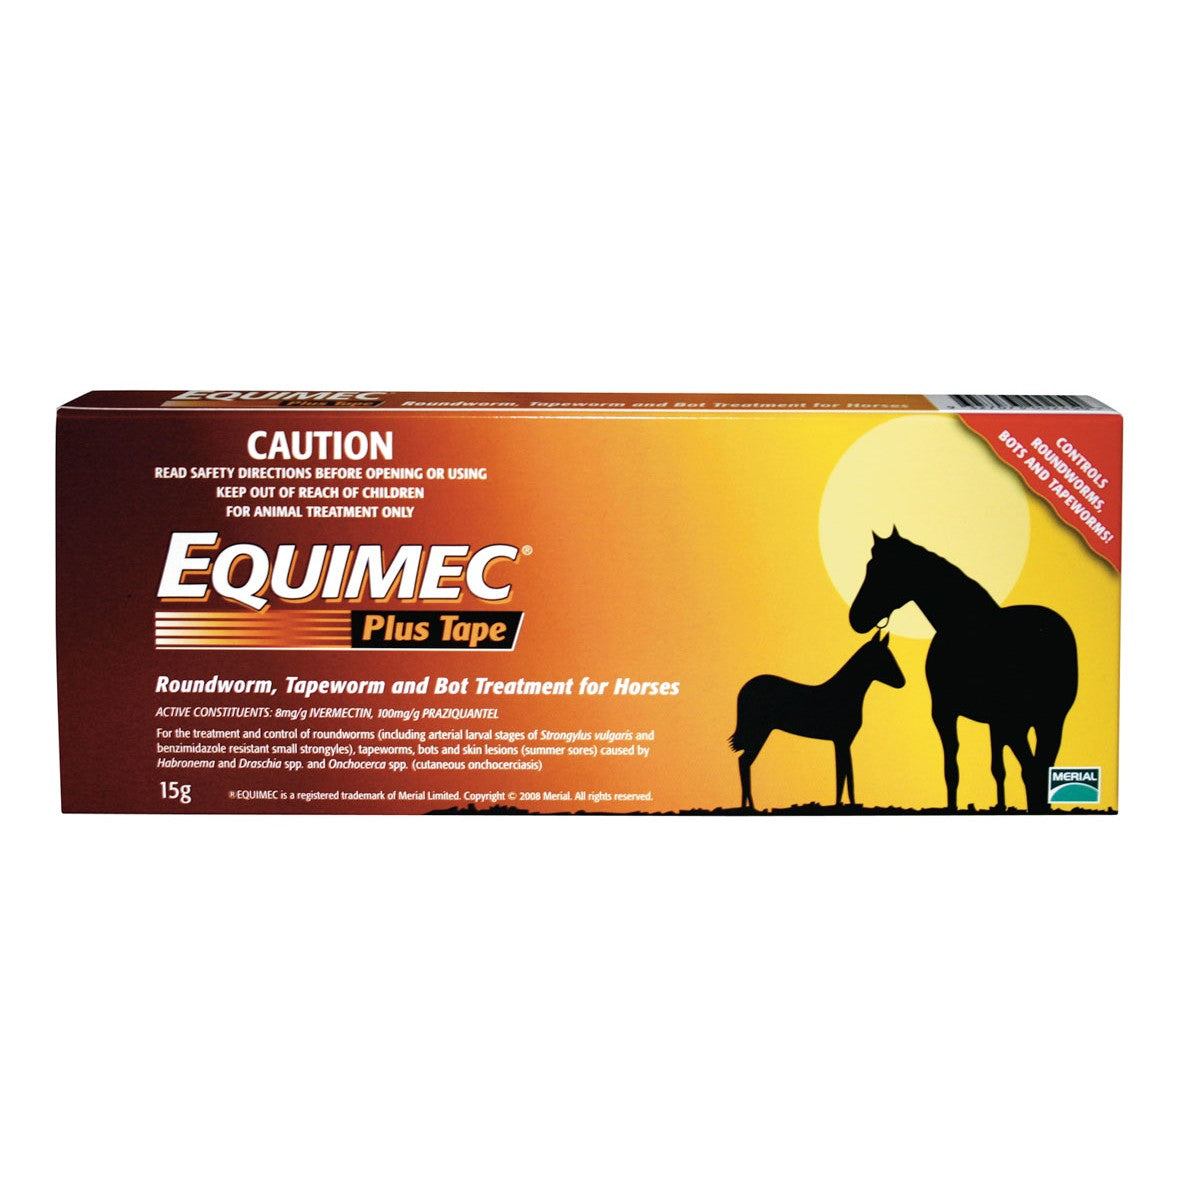 Orange gradient rectangular box of product, with horse silhouette and descriptions.